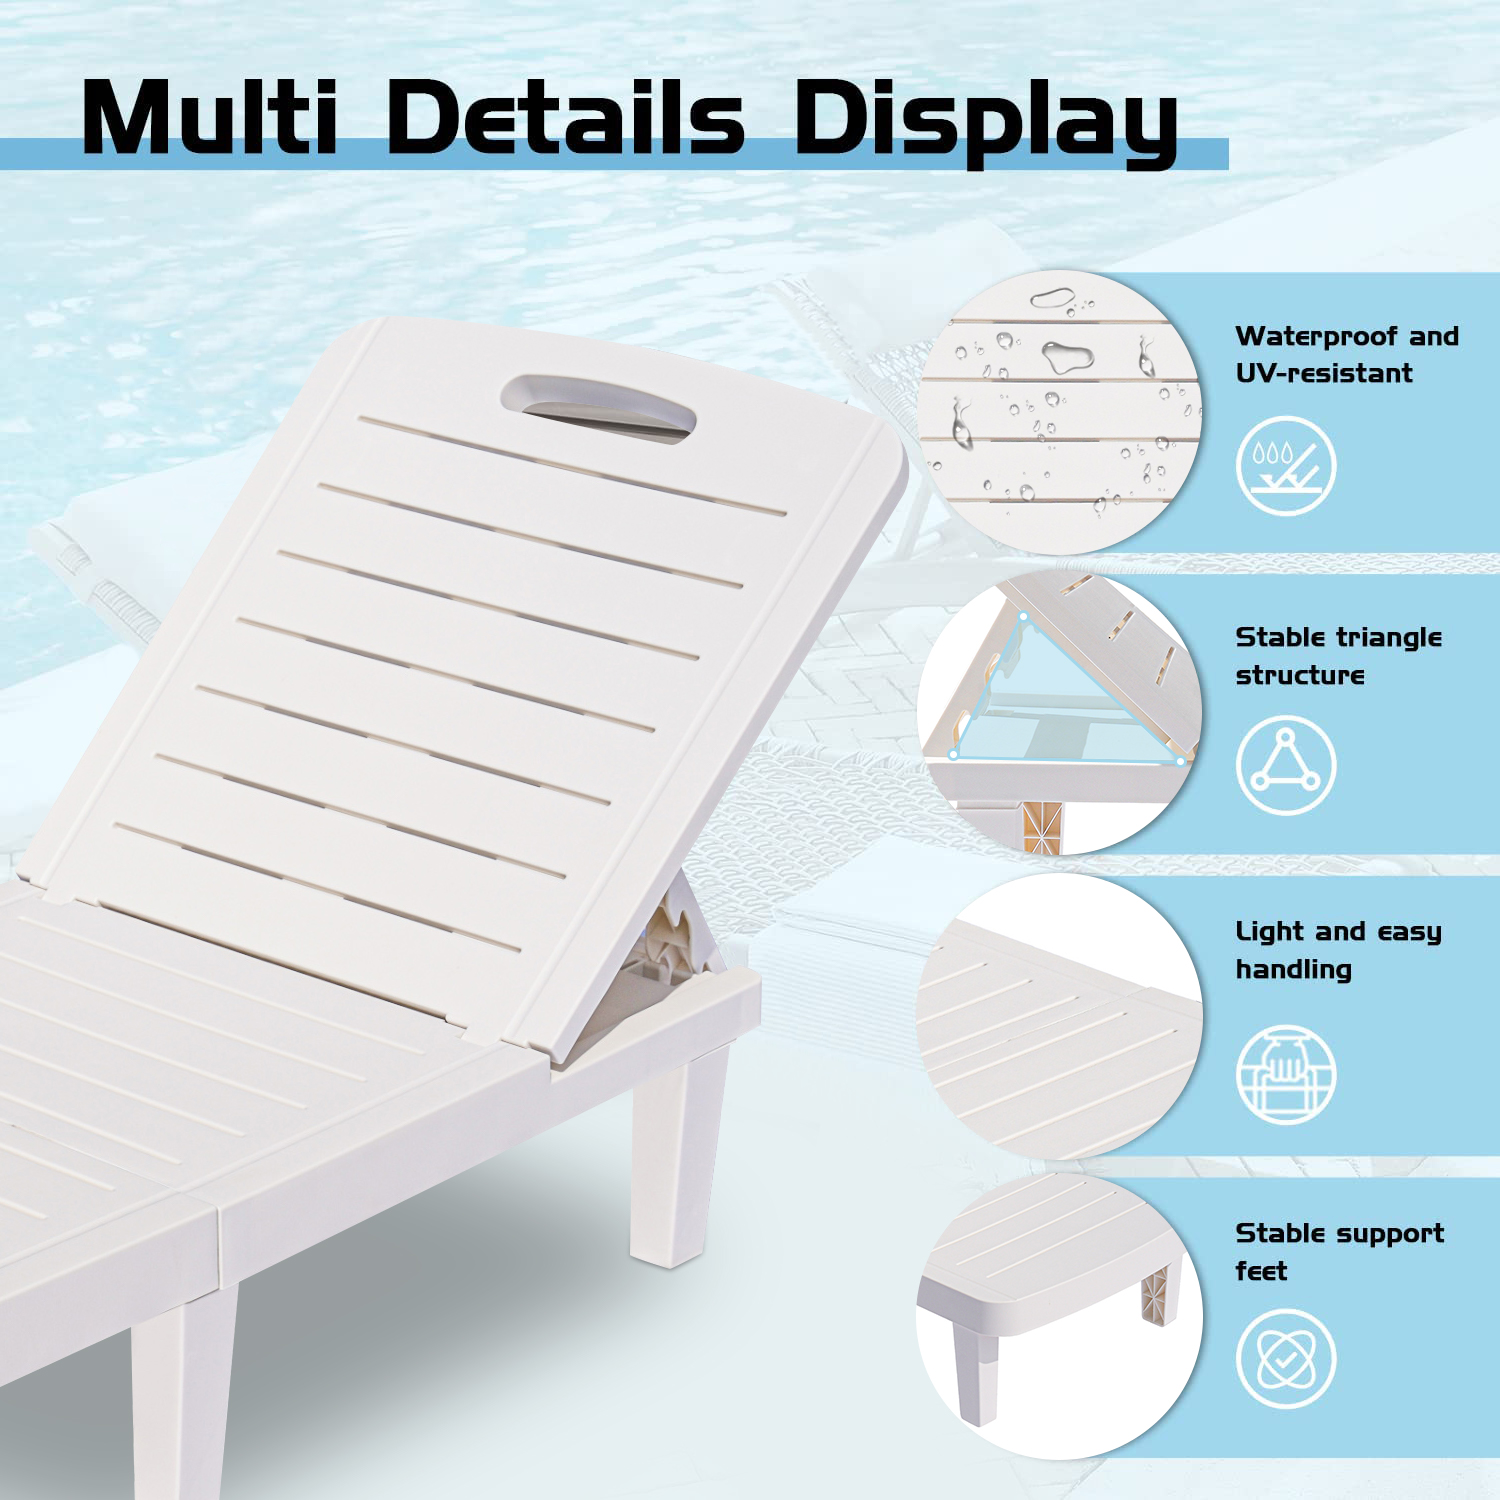 Outdoor Chaise Lounger, Single Patio Chaise Lounge Chair Furniture Set with Adjustable Back and Retractable Tray, All-Weather Plastic Reclining Lounge Chair for Beach, Backyard, Porch, Garden, Pool, L - image 5 of 9